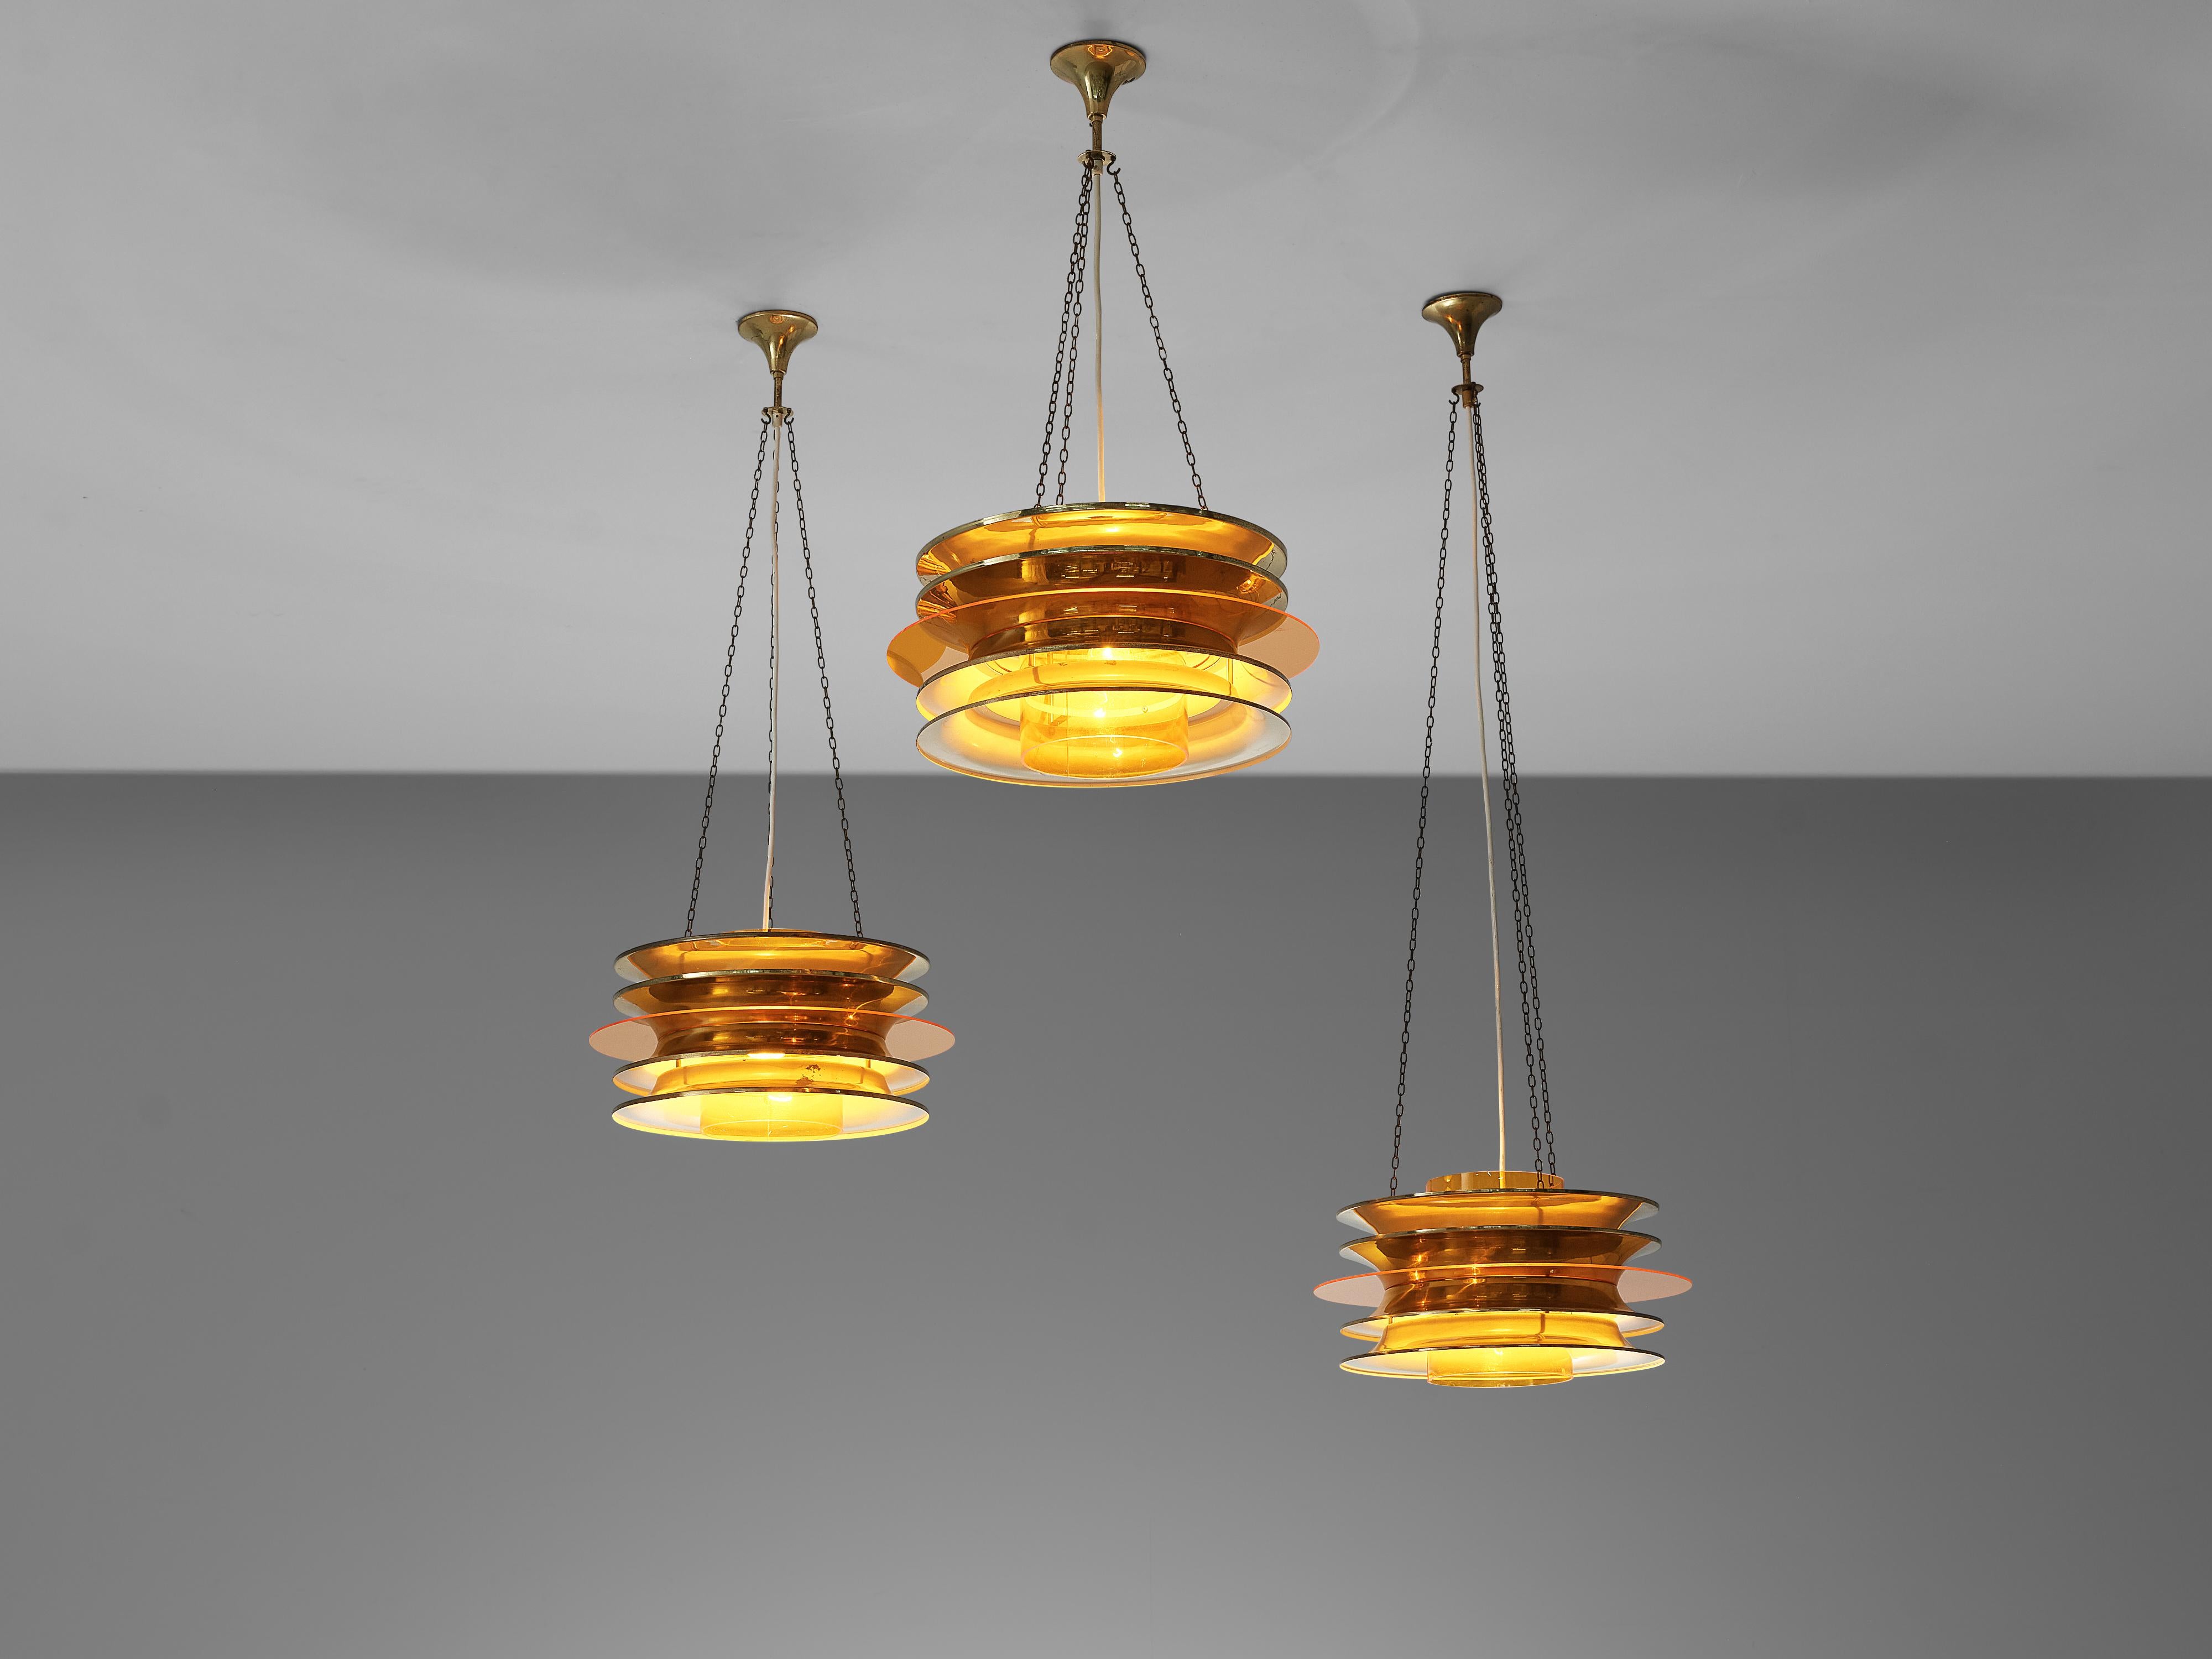 Kai Ruokonen for LYNX, chandelier, brass, orange acrylic, Finland, 1952

Kai Ruokonen is a Finnish designer that mostly works under the artist ‘Kai Finnmark’. This chandelier was designed for the Palace Hotel in Helsinki in 1952 and manufactured